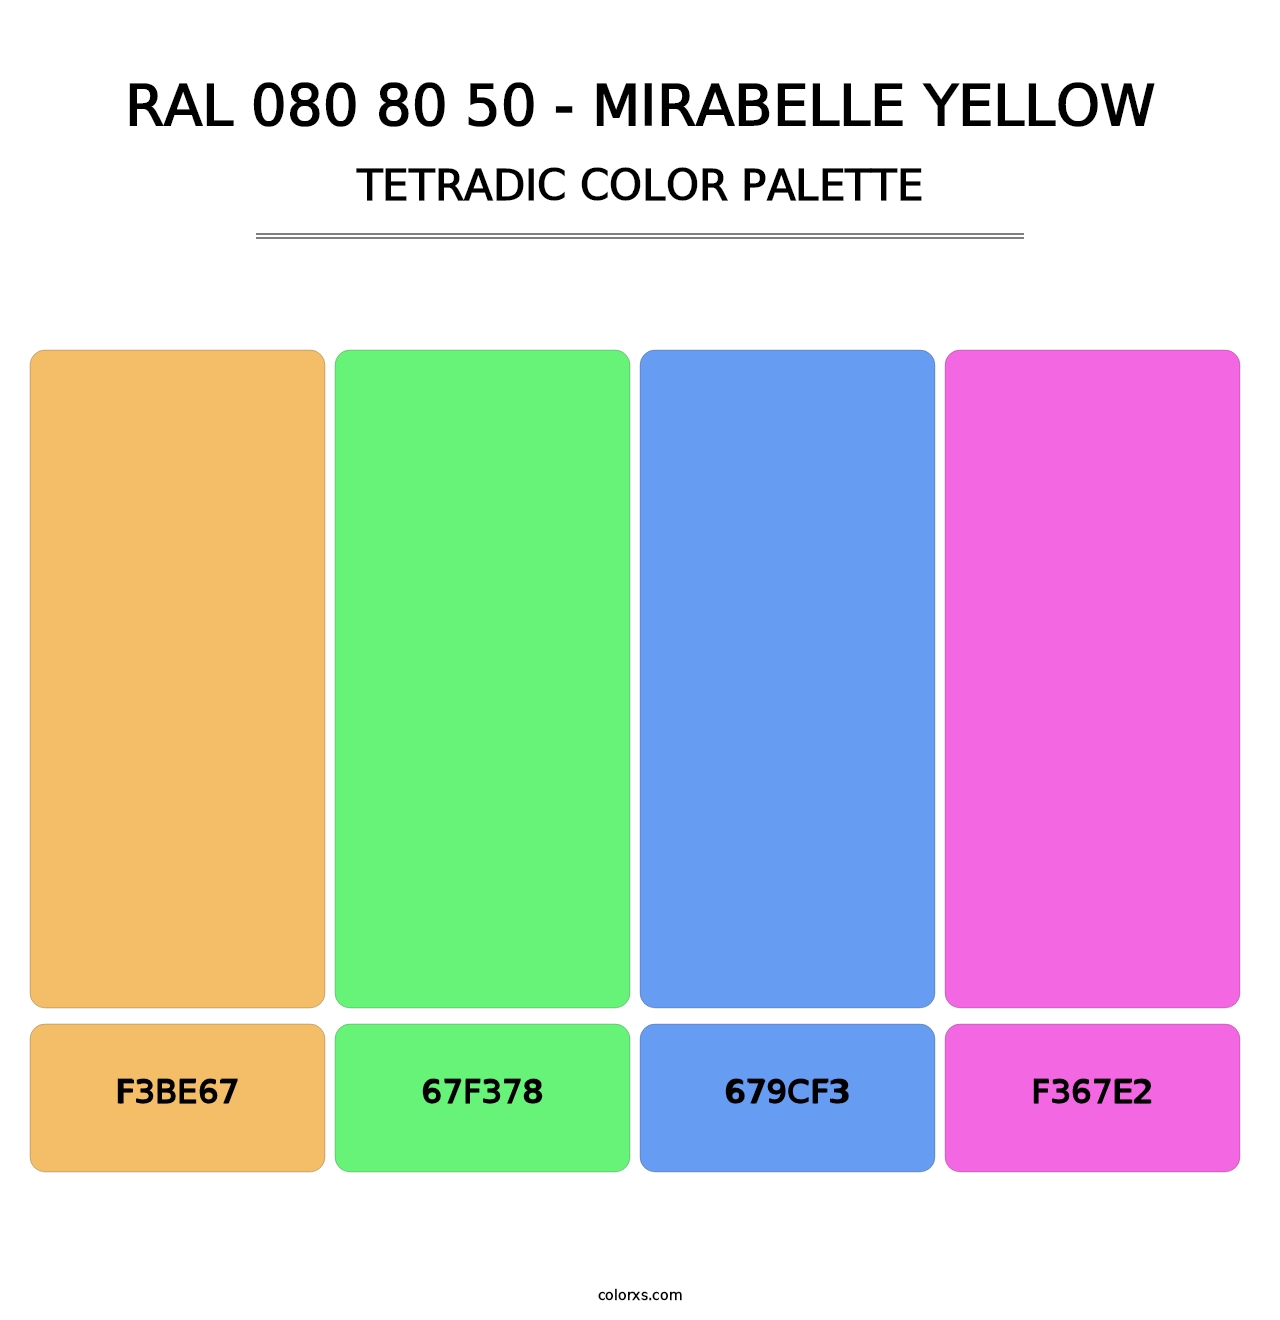 RAL 080 80 50 - Mirabelle Yellow - Tetradic Color Palette